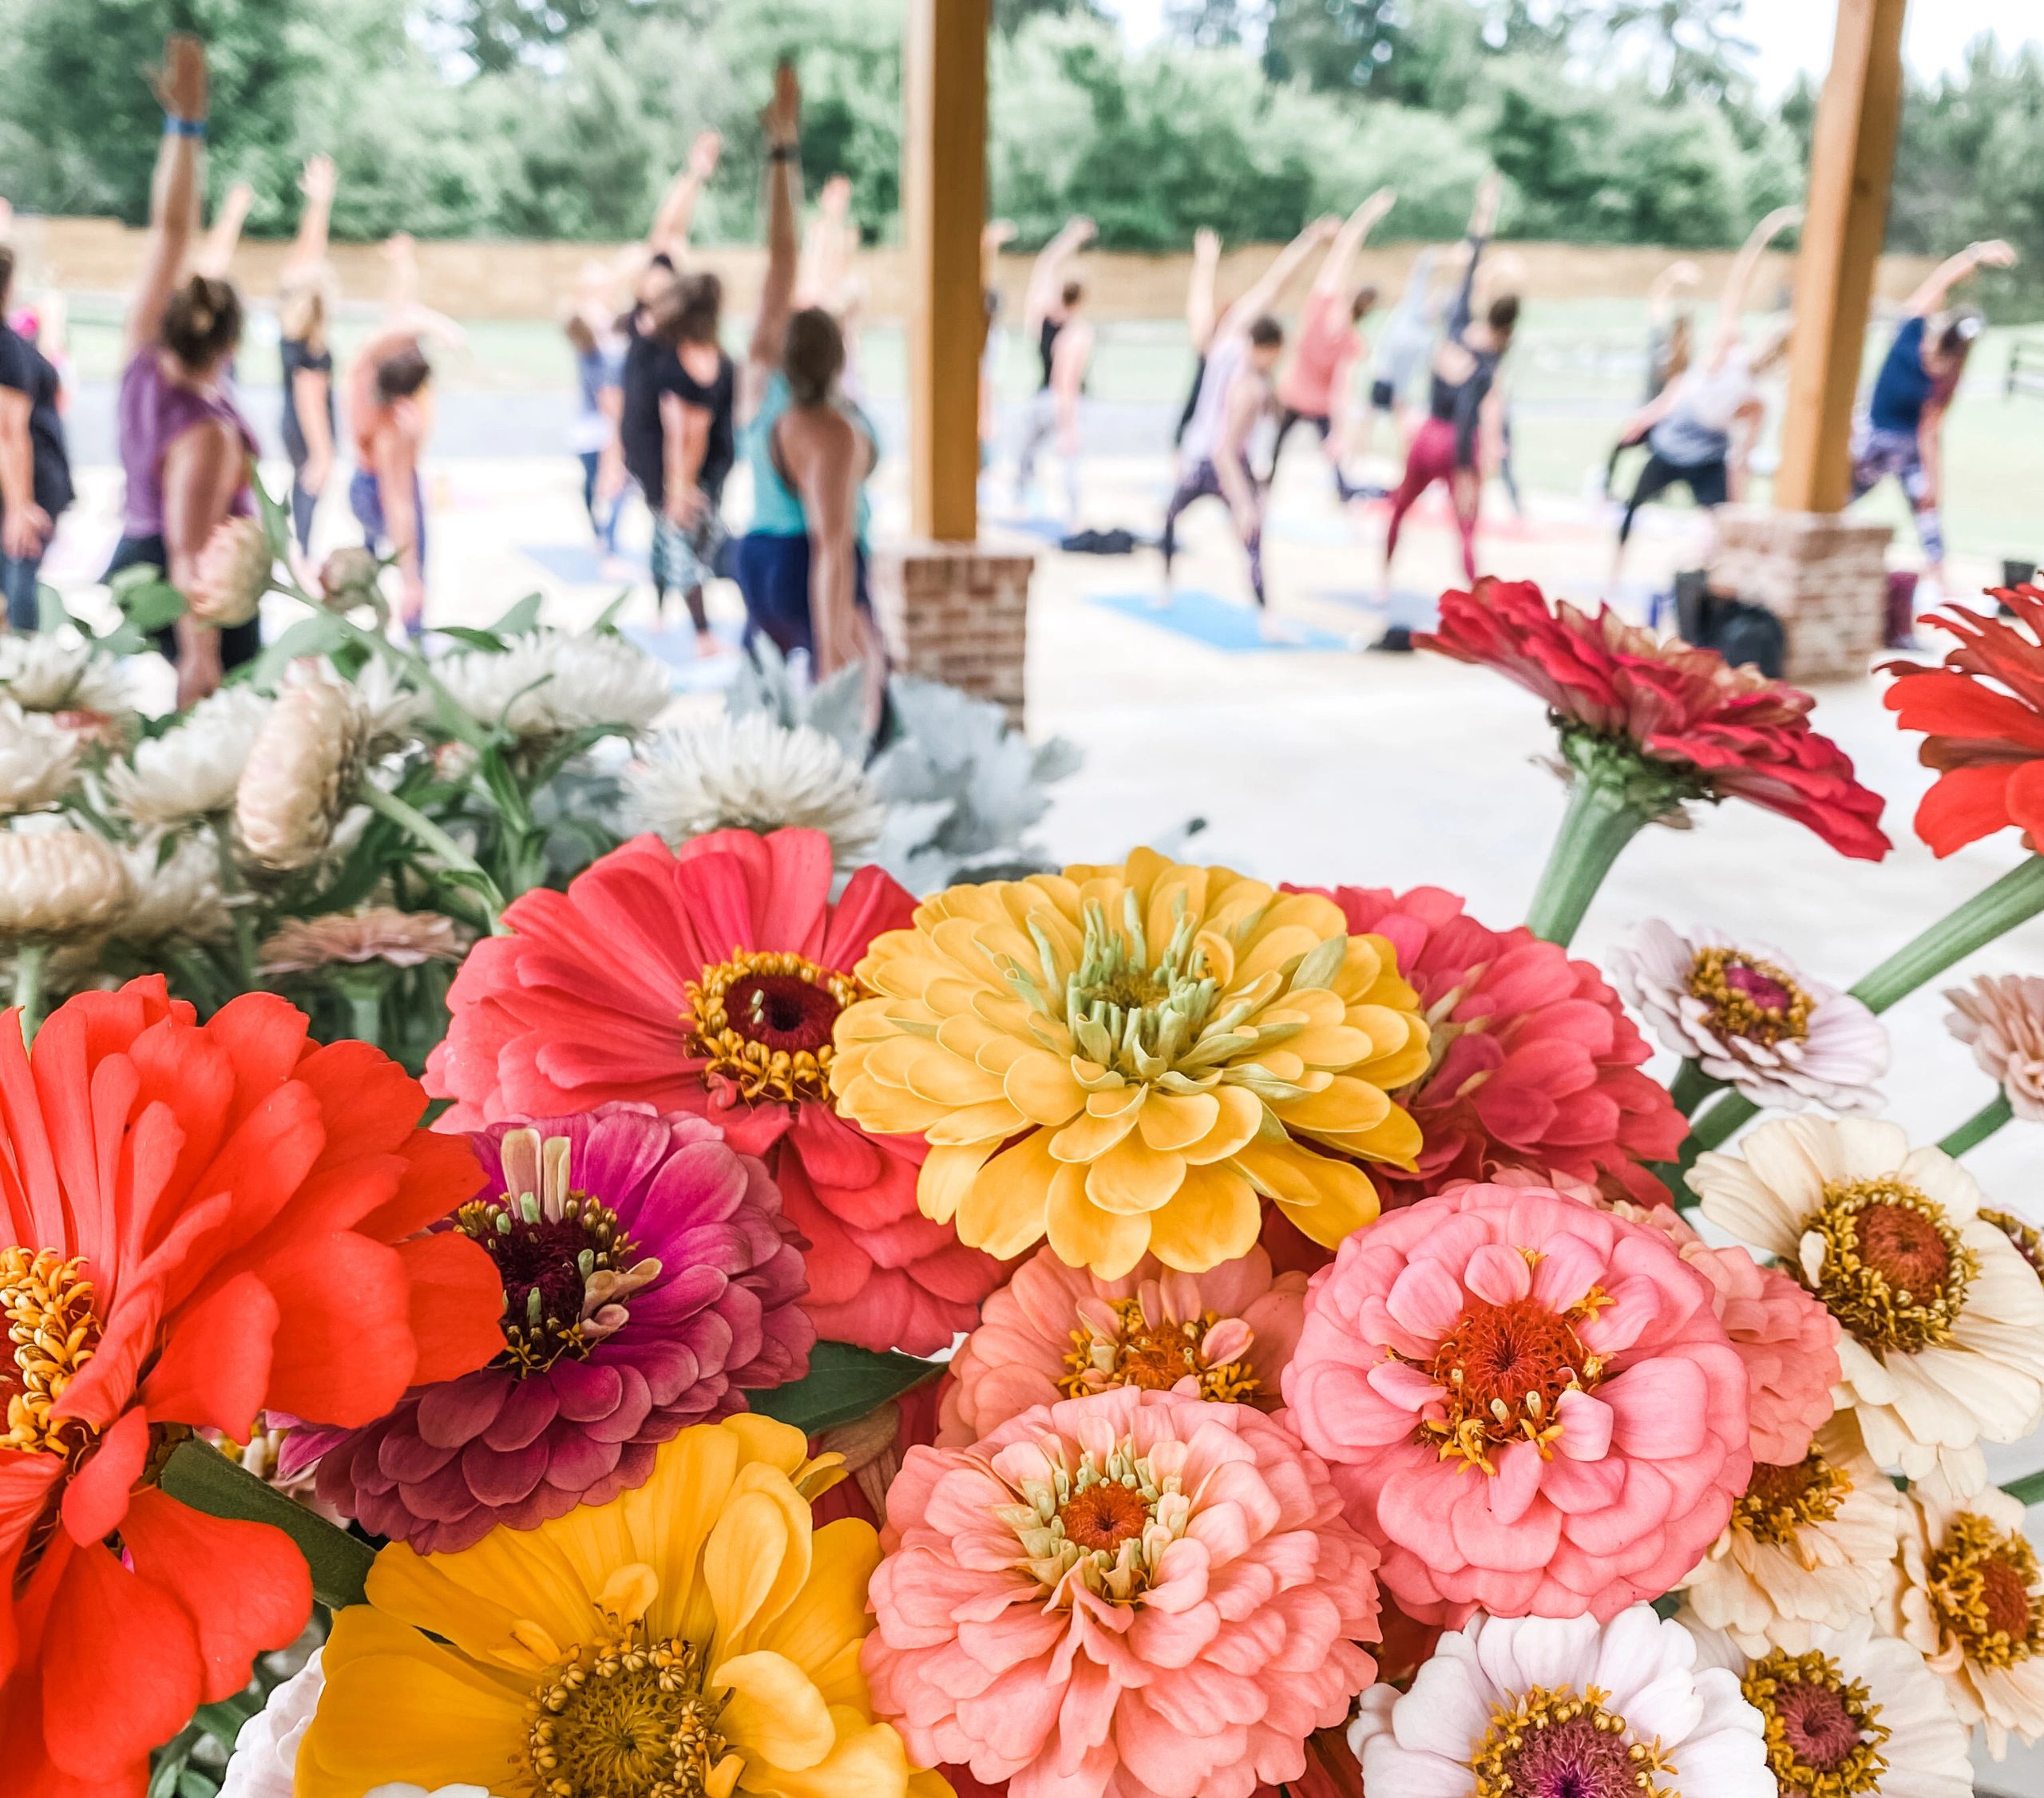 bright colored zinnia flowers in the foreground with an outdoor yoga class working in the background